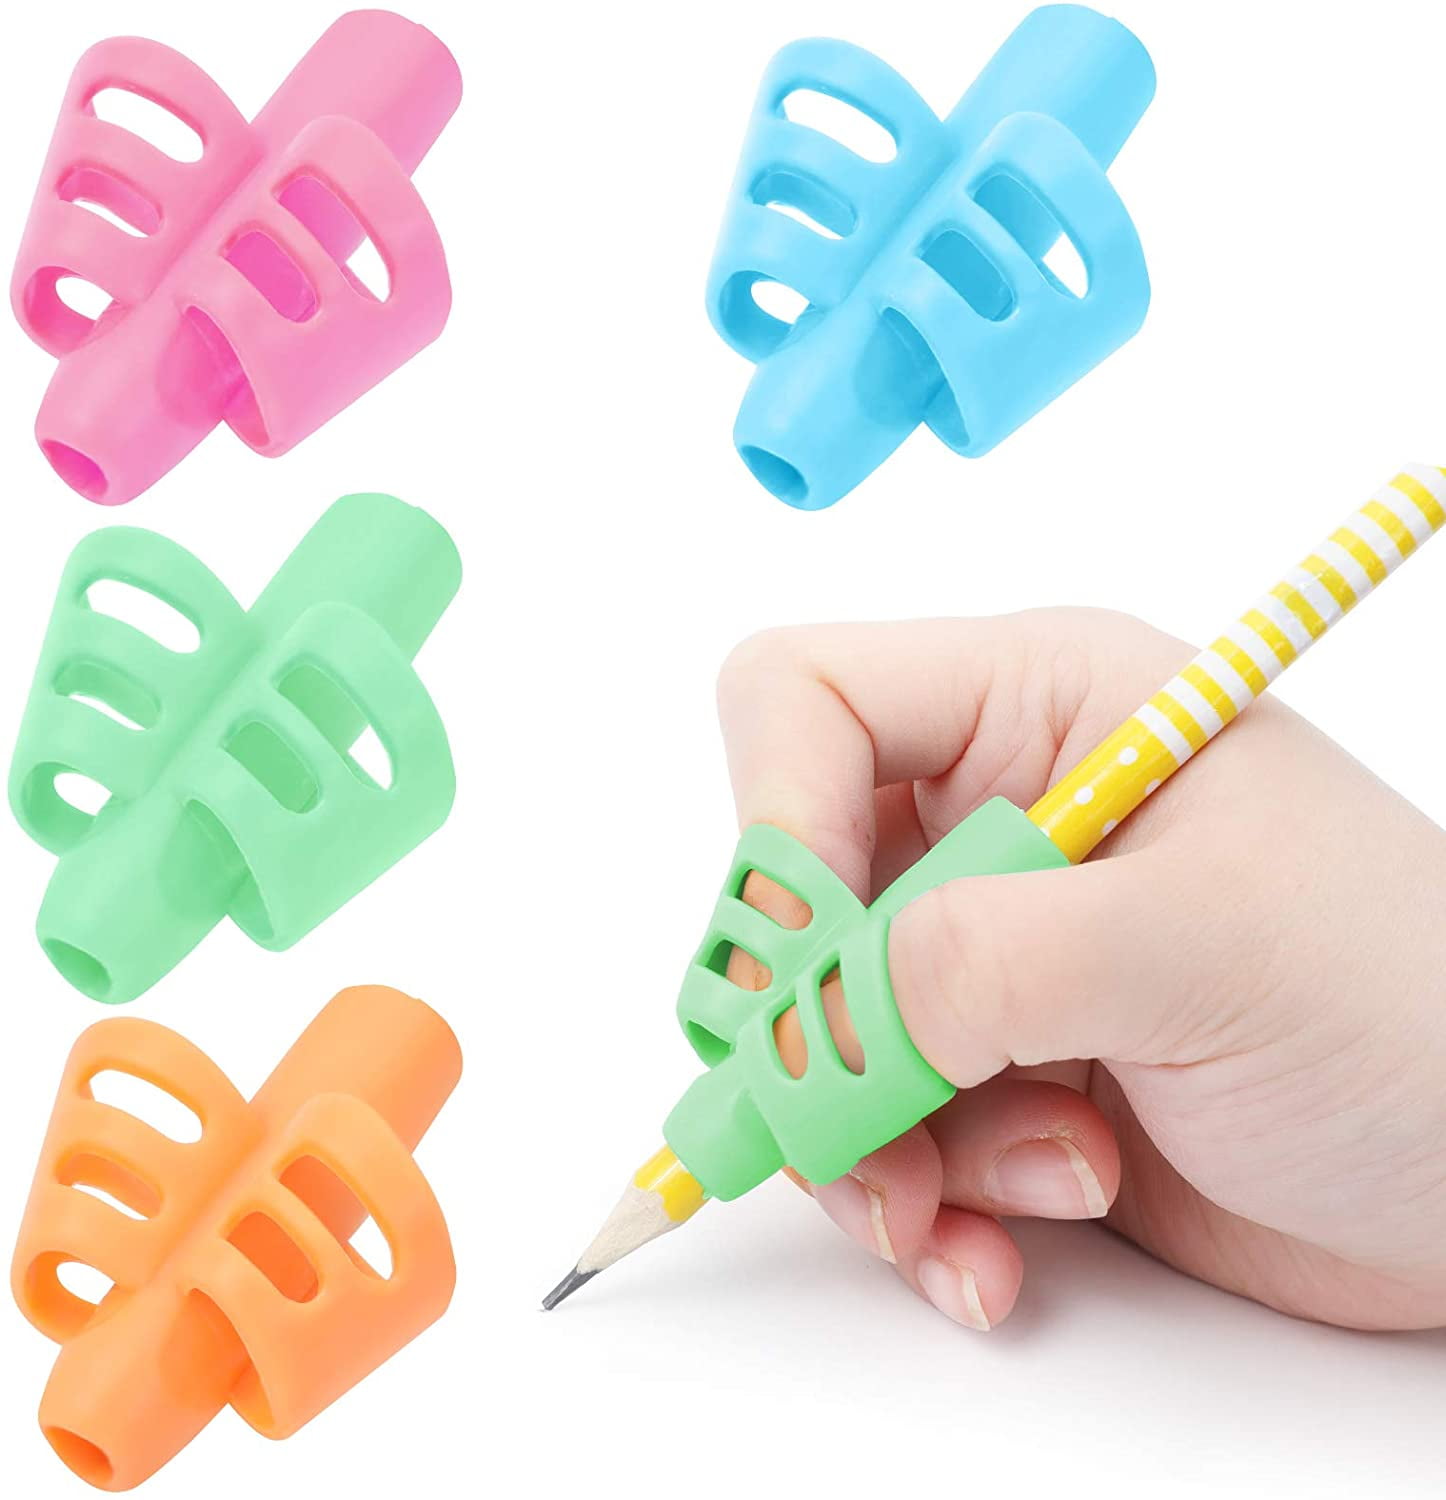 Finger Grips Holder Ergonomic Writing Aid Grip Posture Correction for Kids Autism Adults Special Needs Righties or Lefties 10 Pack Pencil Grips for Children 